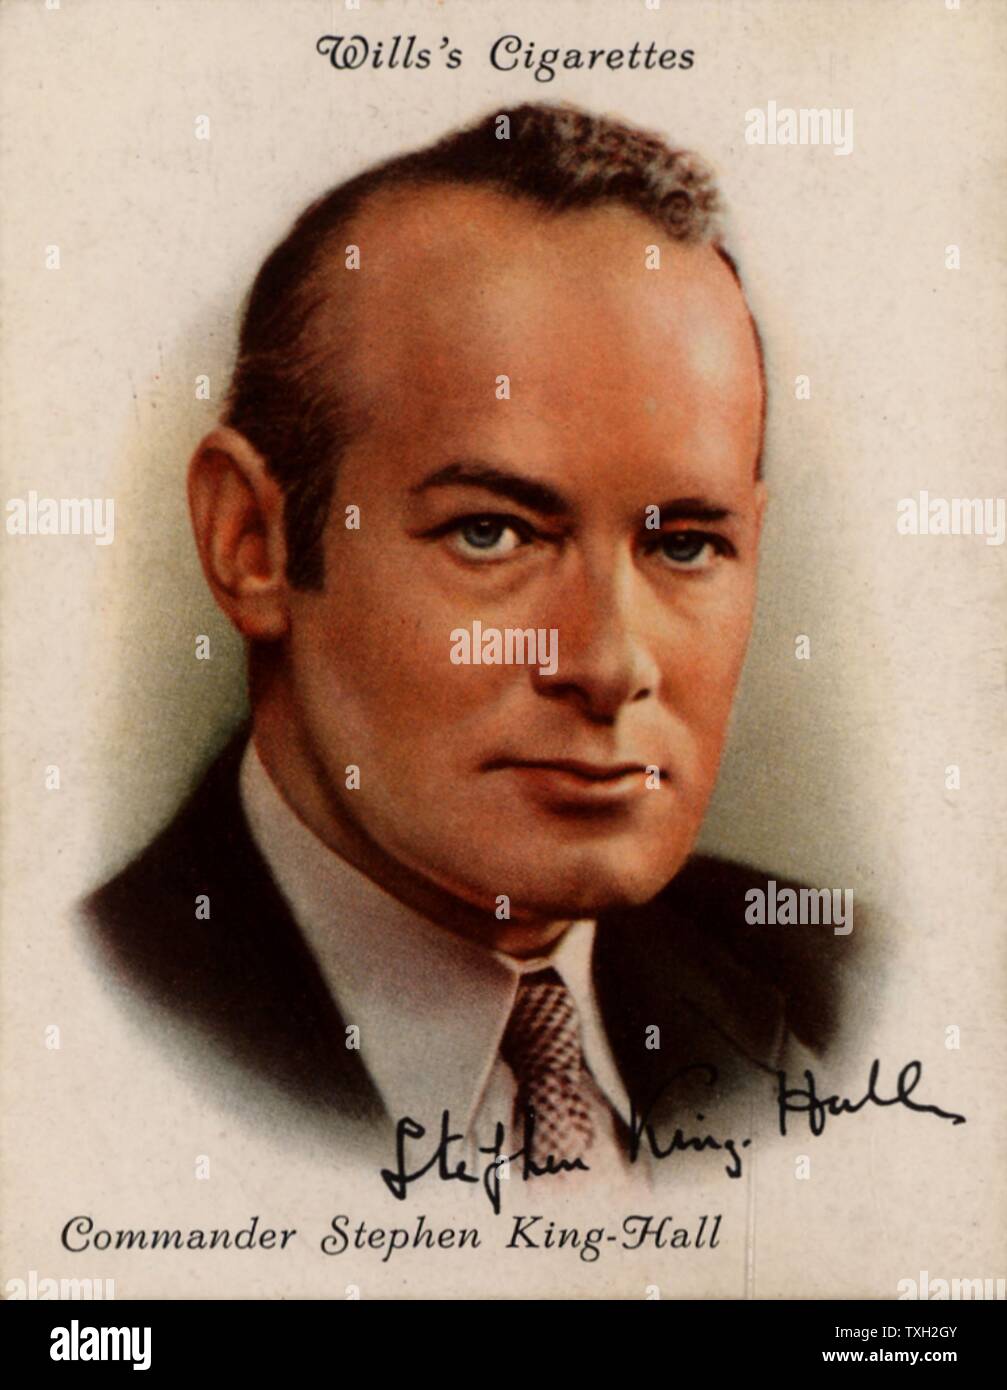 (William Richard) Stephen King-Hall (1893-1966) British author, playwright and radio broadcaster. In 1930 he retired from the Royal Navy to join the Royal Institute of International Affairs.  From a series of cards of 'Famous British Authors' (London, 1937). Stock Photo